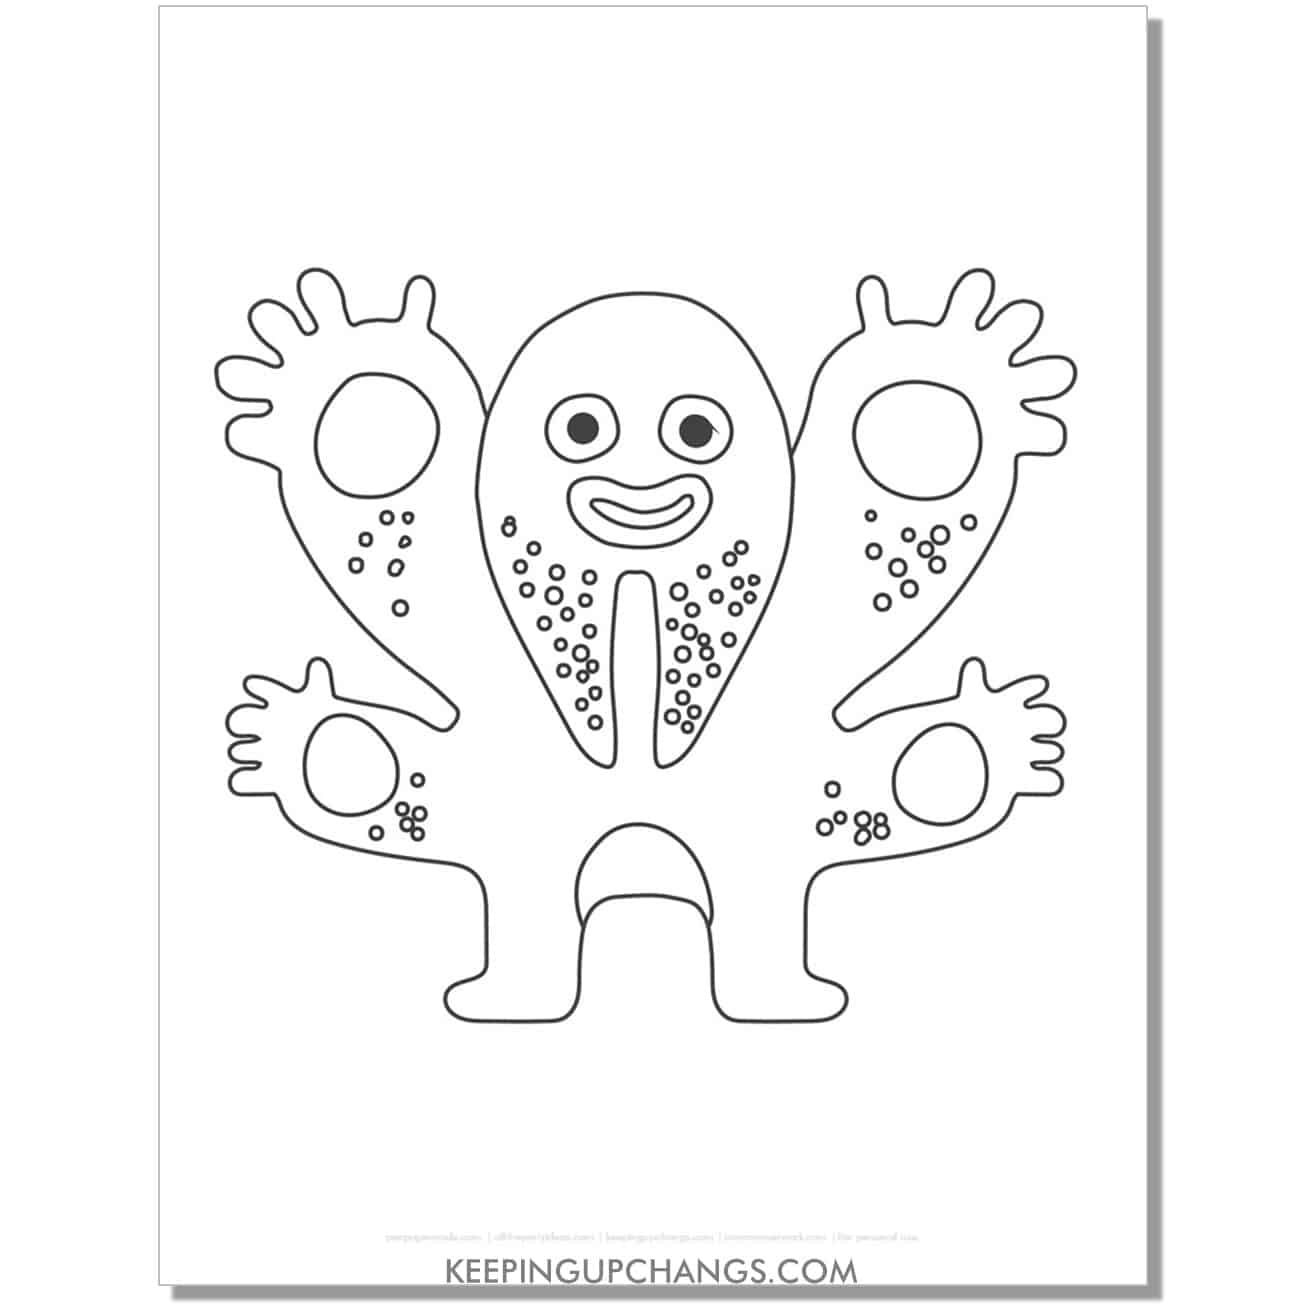 free large, four armed monster coloring page.